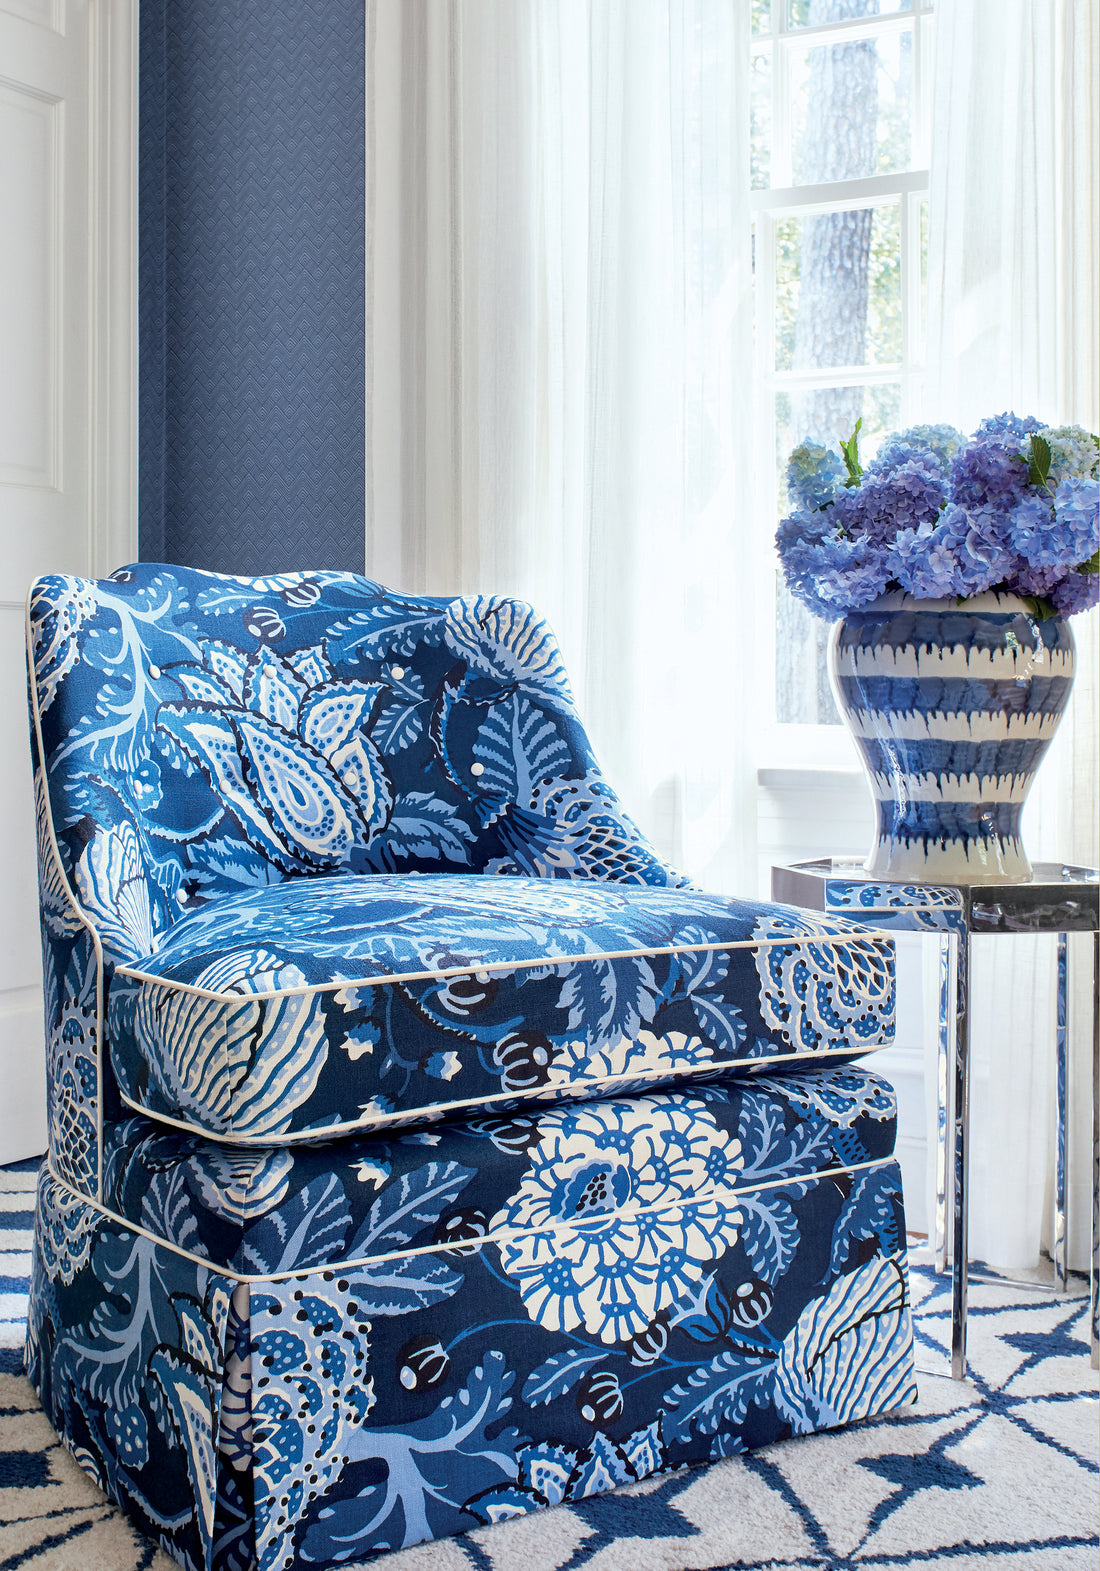 Brentwood Chair in Mitford printed fabric in navy color - pattern number F92943 by Thibaut in the Paramount collection